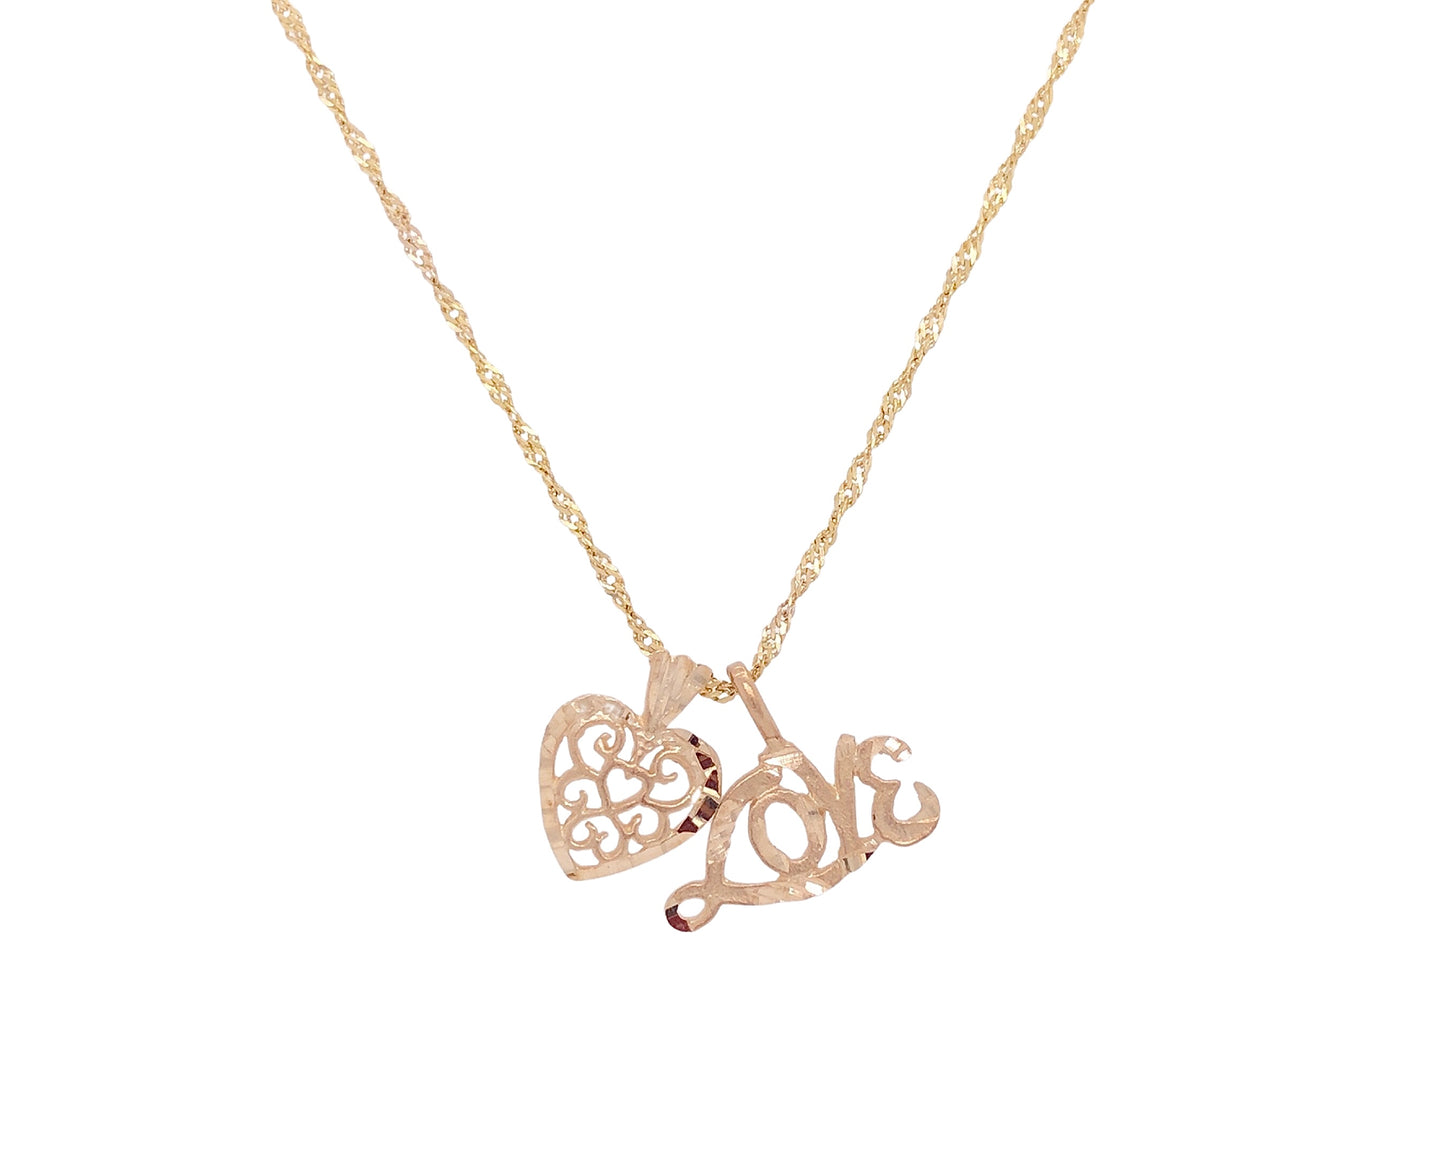 "love" charm and the heart charm on a 10k yellow gold chain